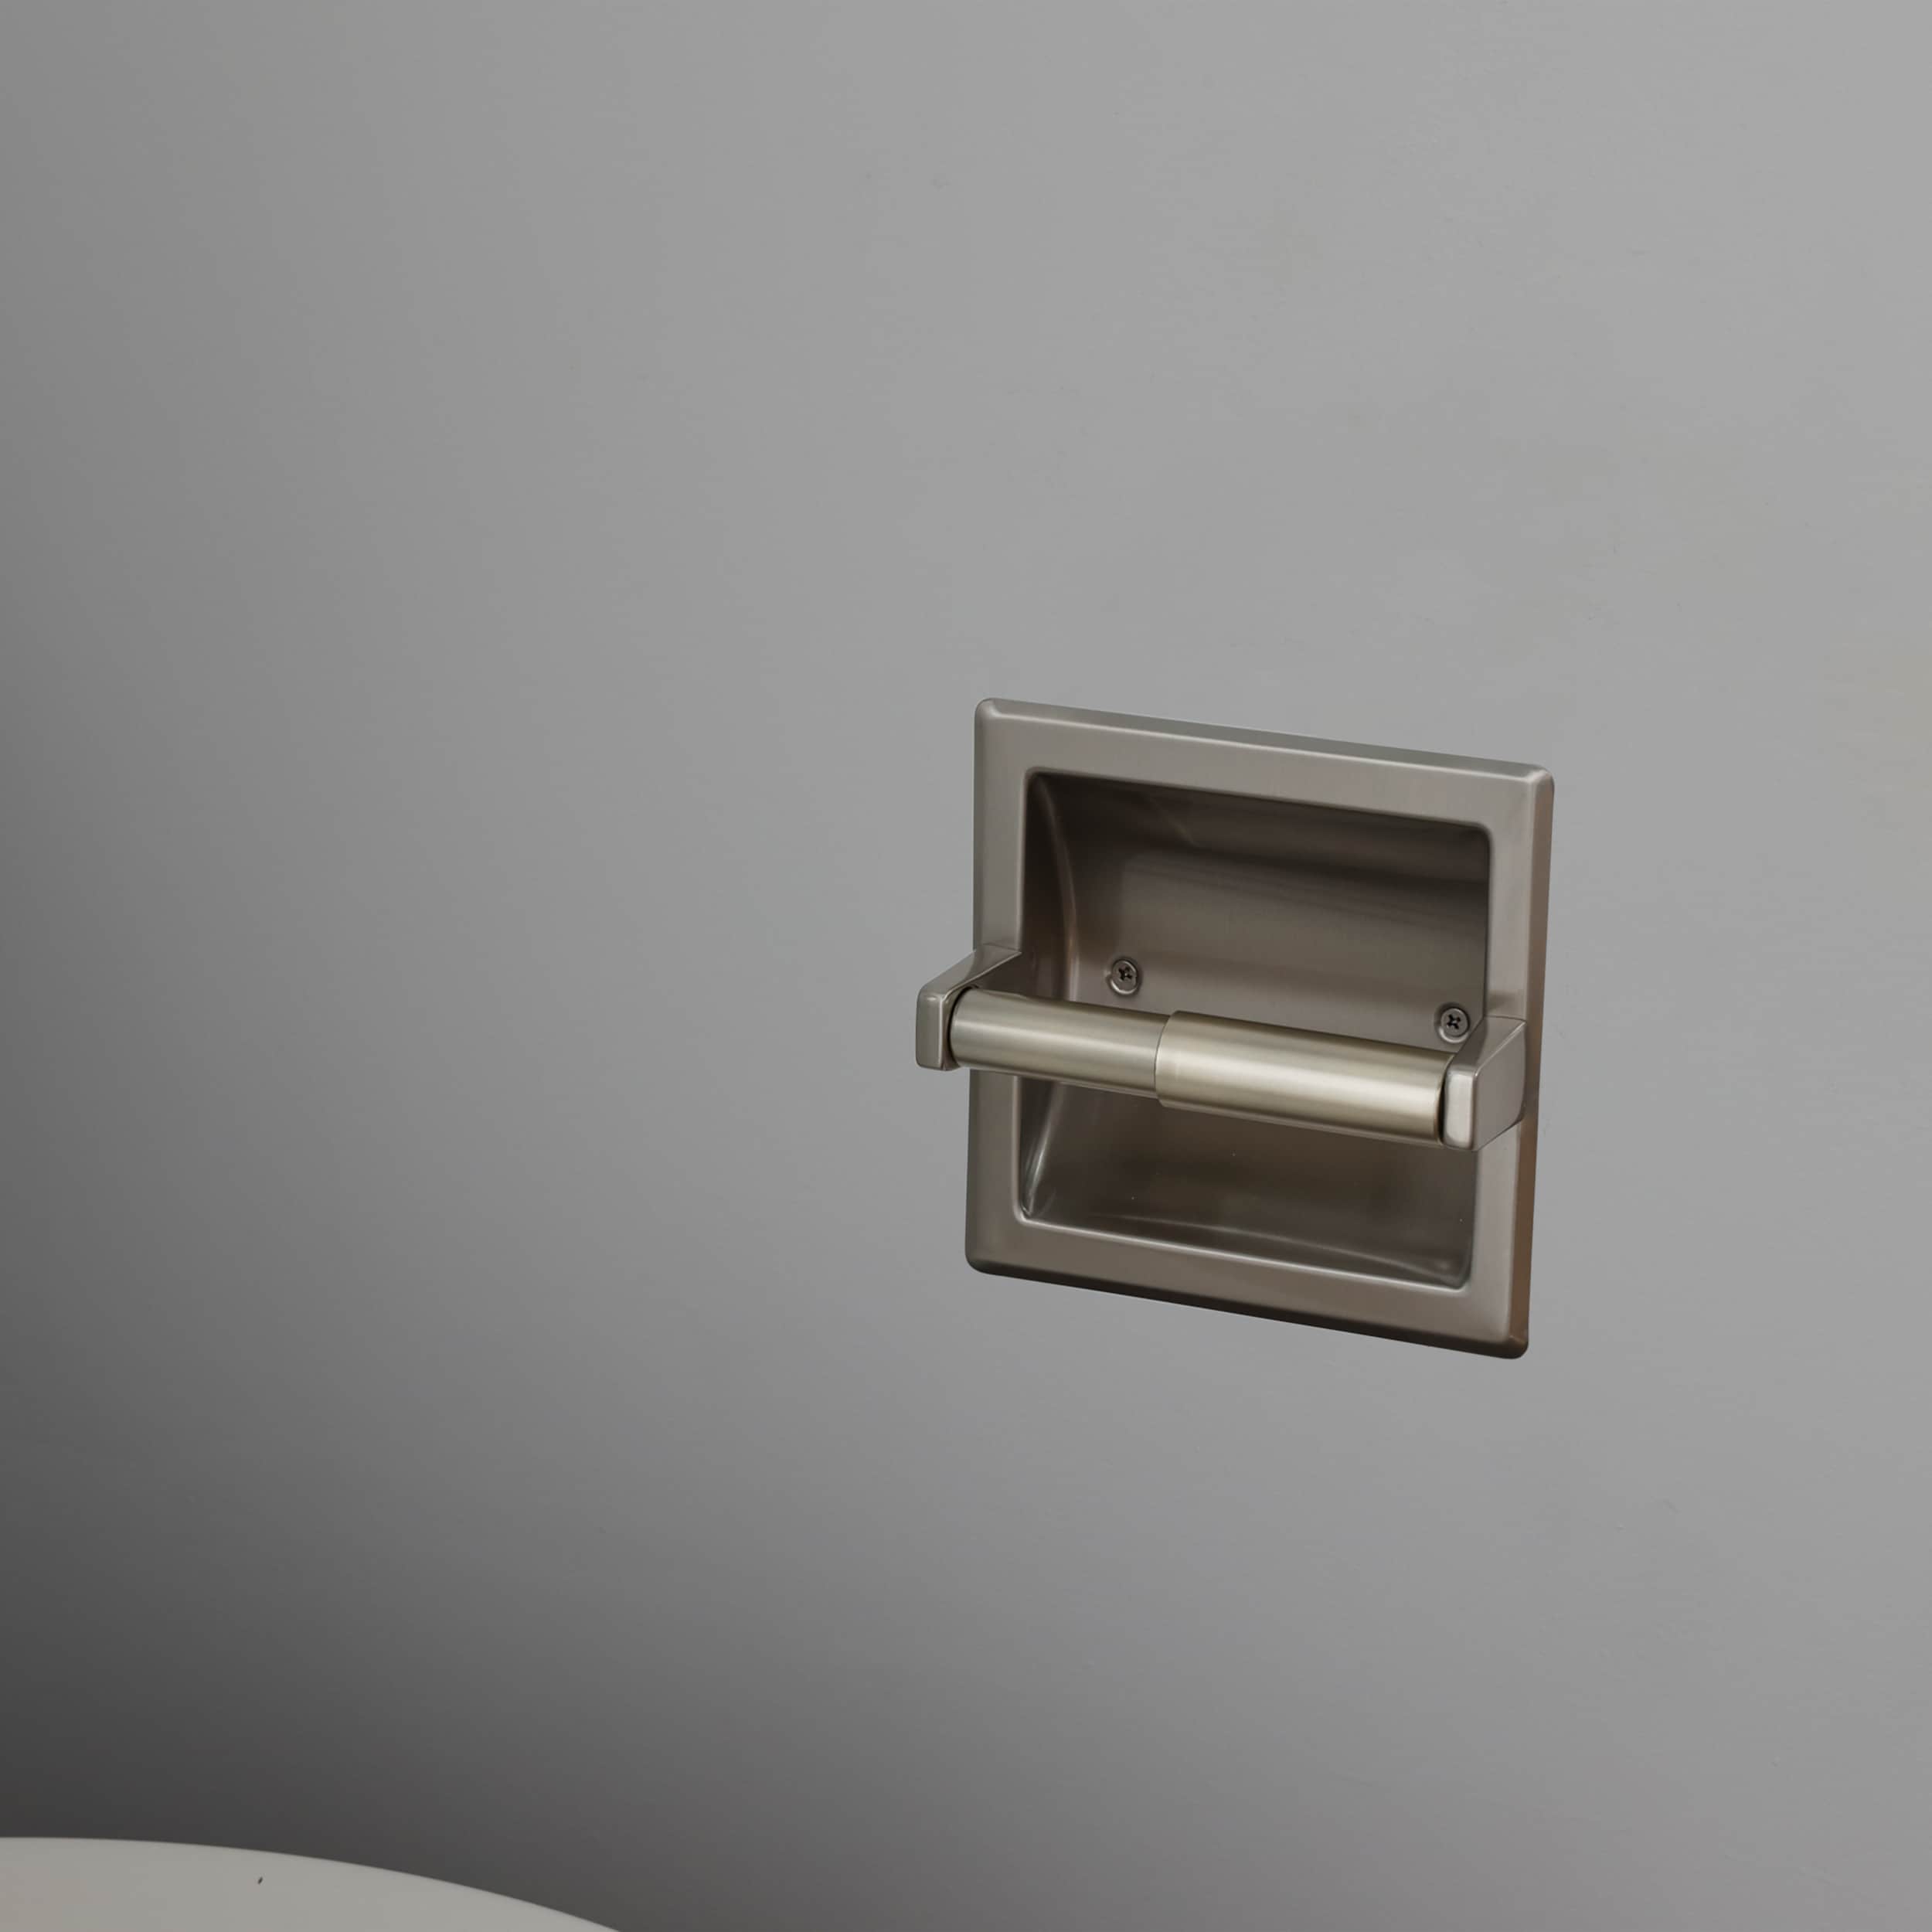 Project Source Seton Brushed Nickel Pvd Recessed Spring-loaded